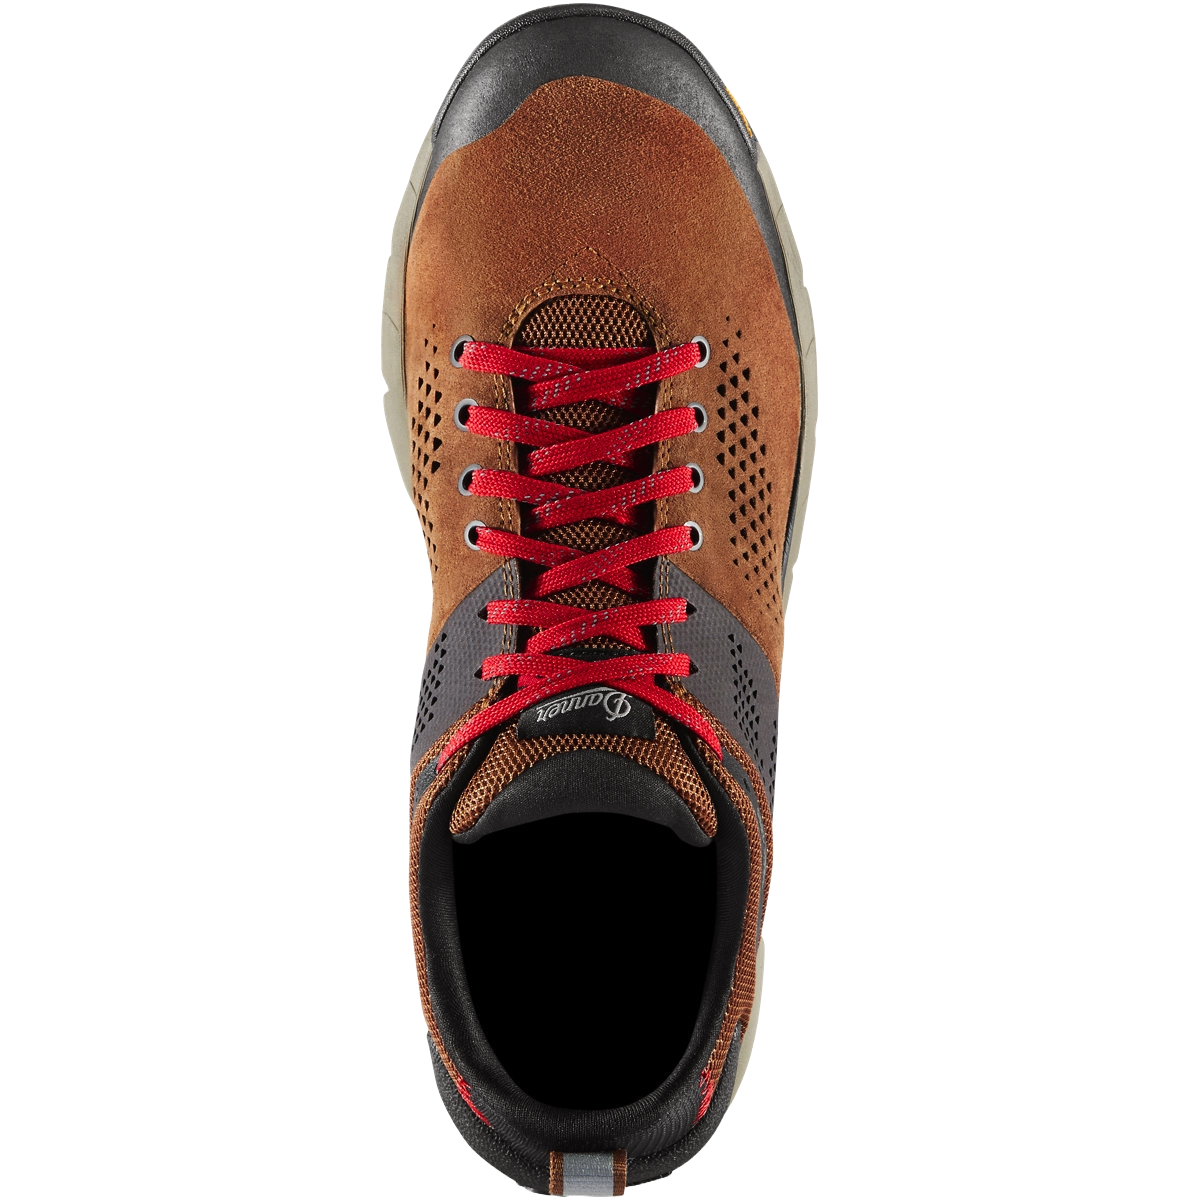 Danner Men's Trail 2650 Brown & Red Hiking Shoes 61272